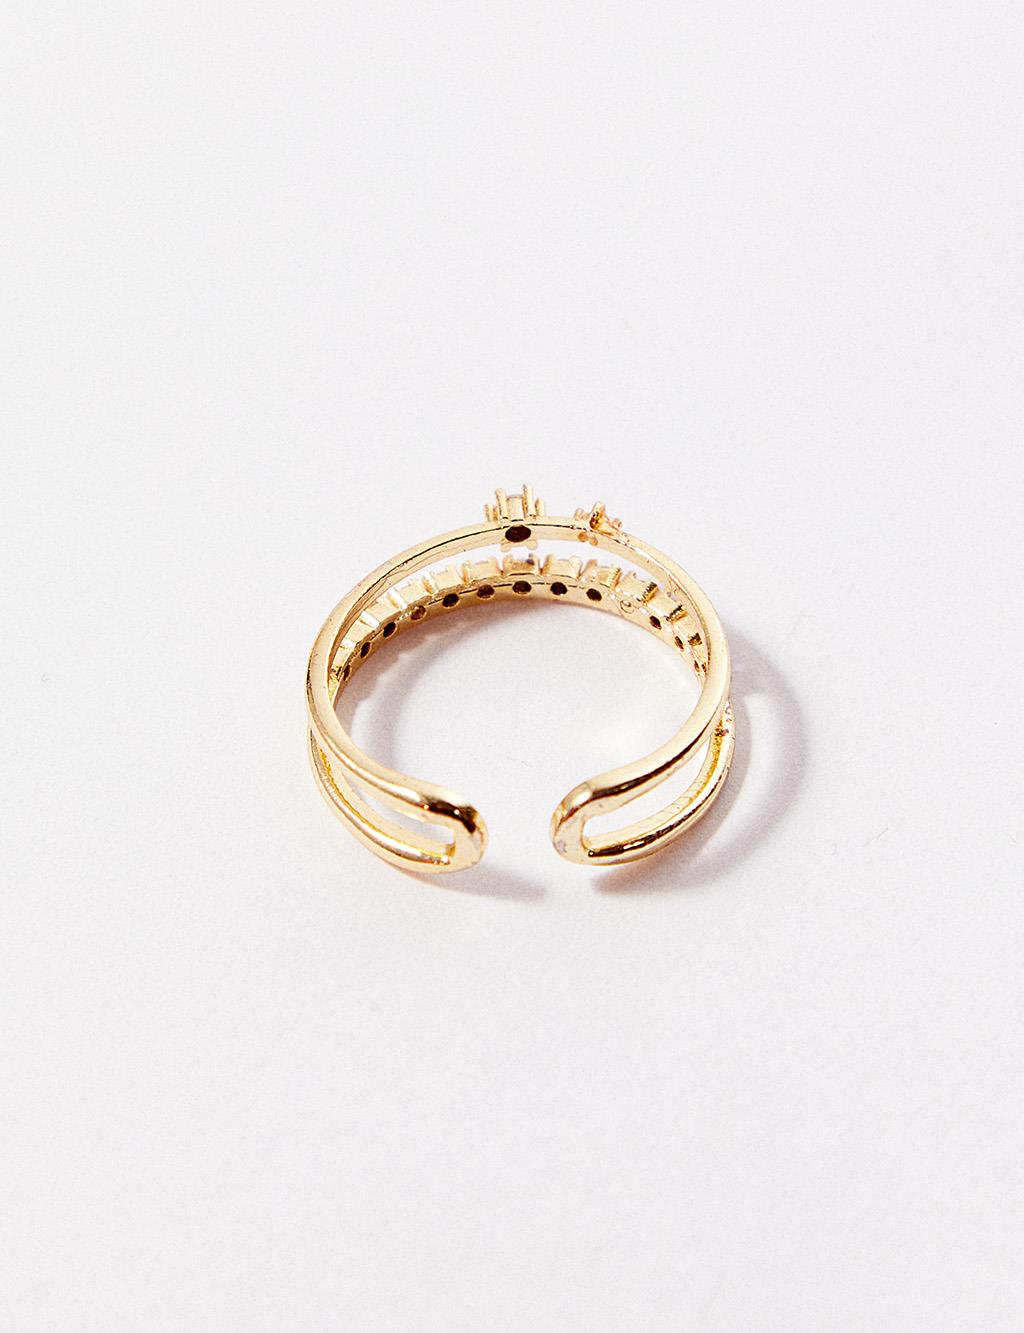 Double Strand Stone Ring Gold Color